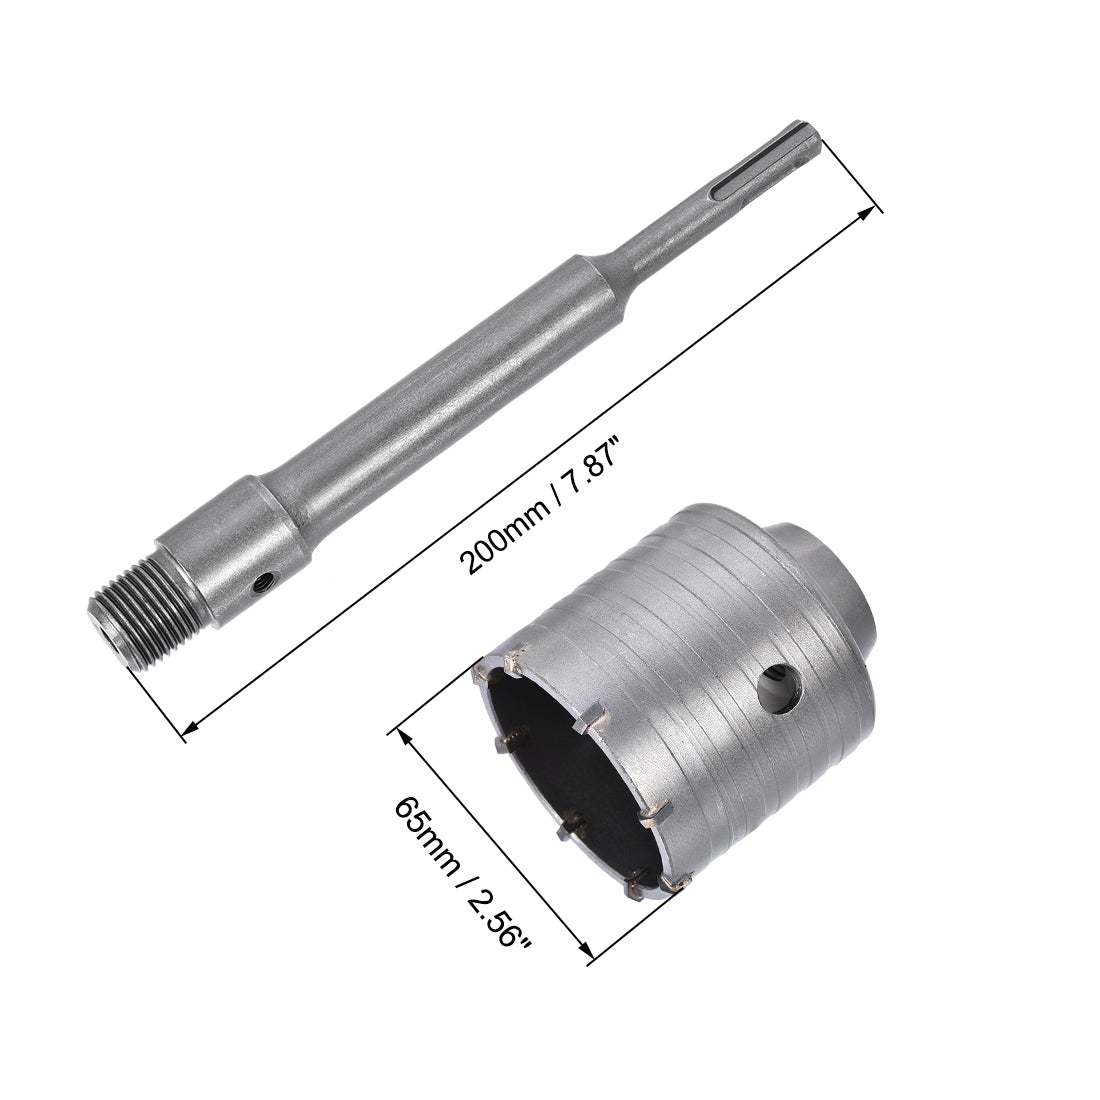 uxcell Uxcell Wall Hole Drill Bit Hole Saw Round Shank with Connecting Rod Drill for SDS X4 Impact Drill